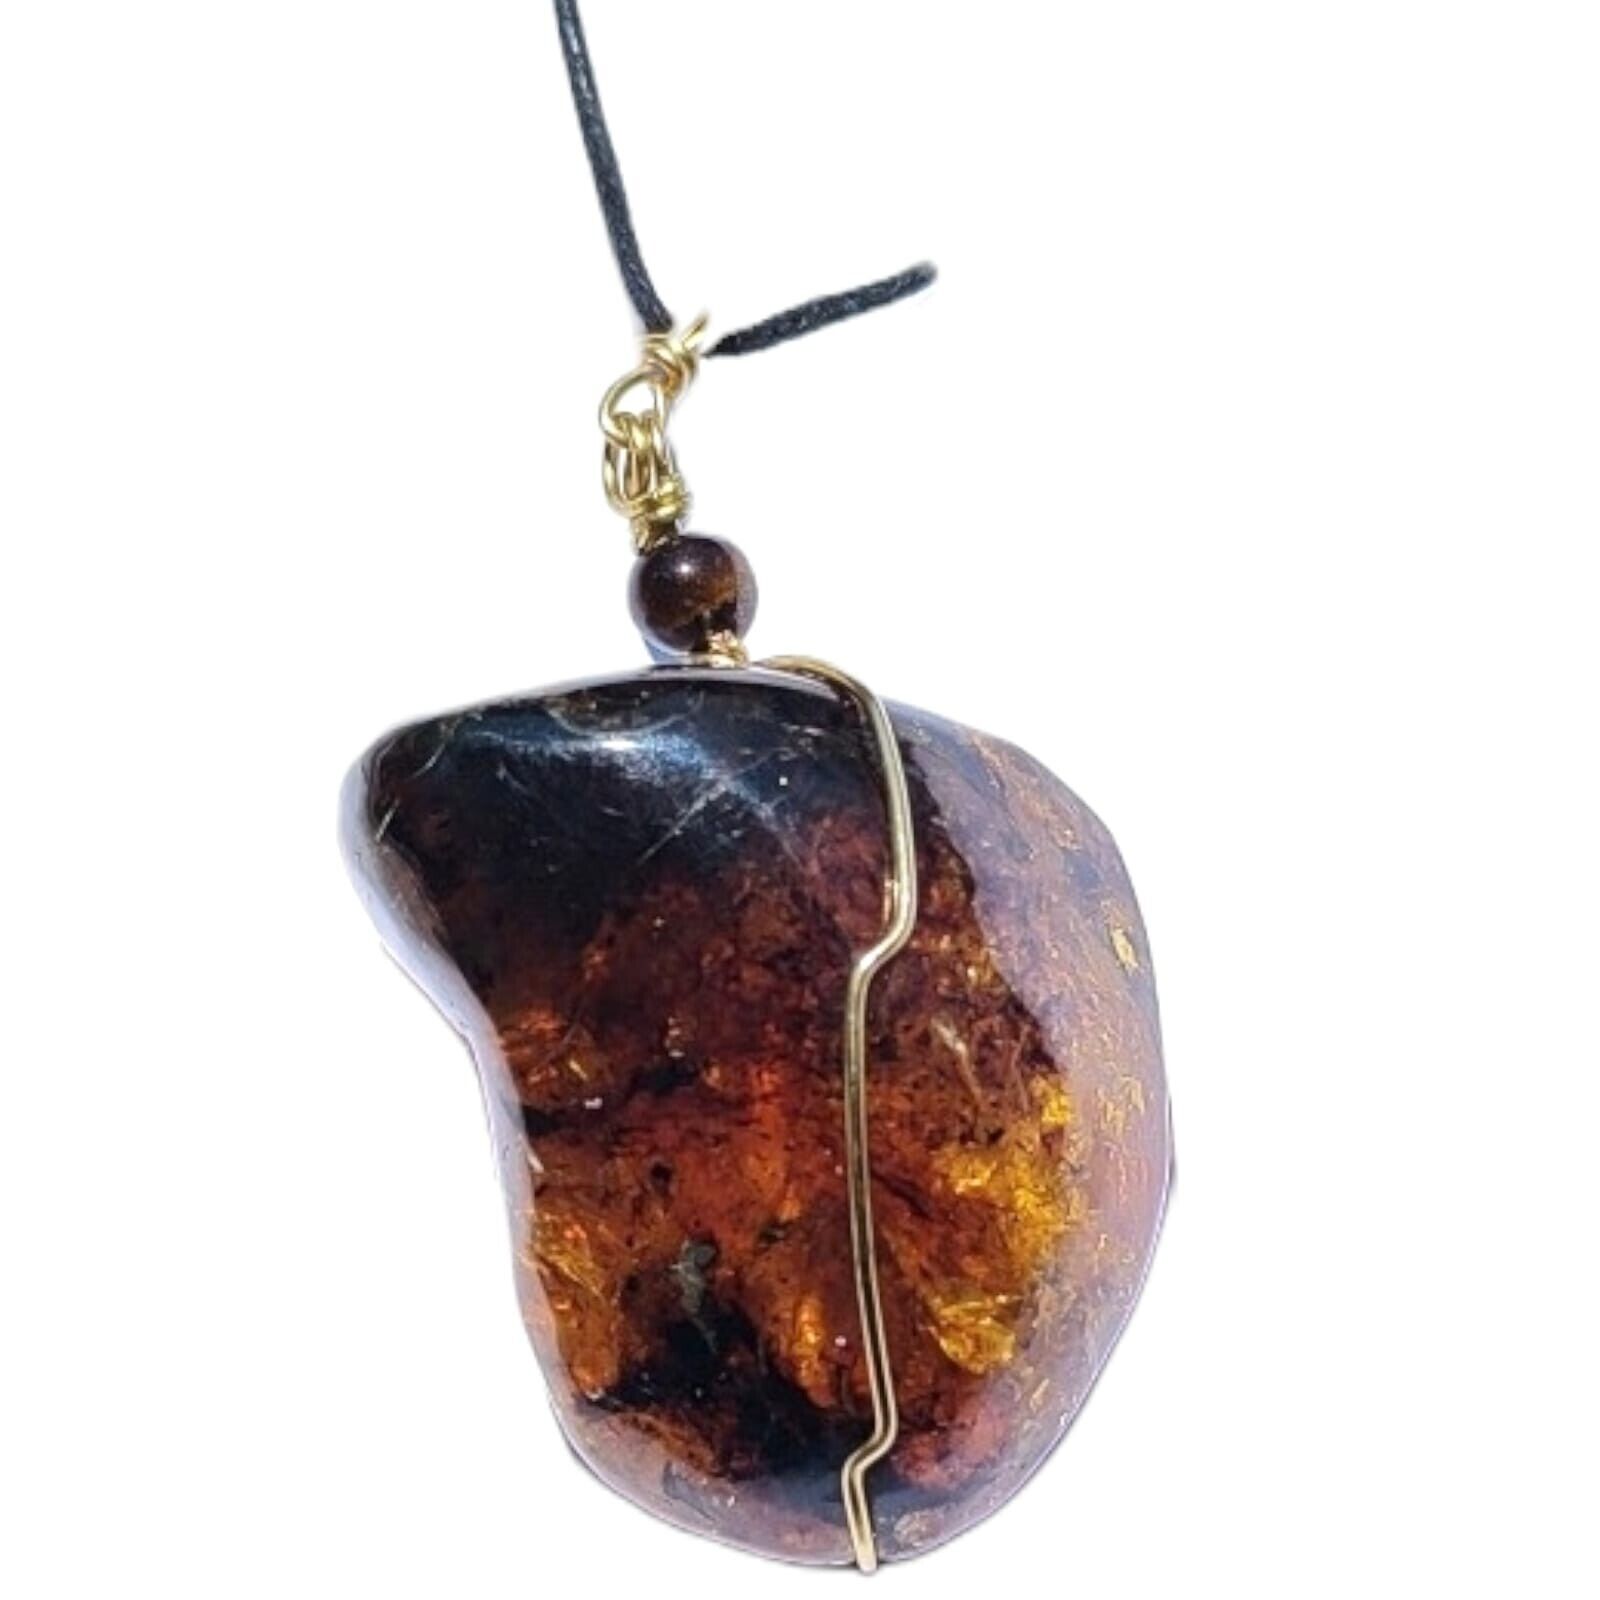 Mexican Amber Mossy Polished Pendant: Artisan Craftsmanship, Exceptional Quality